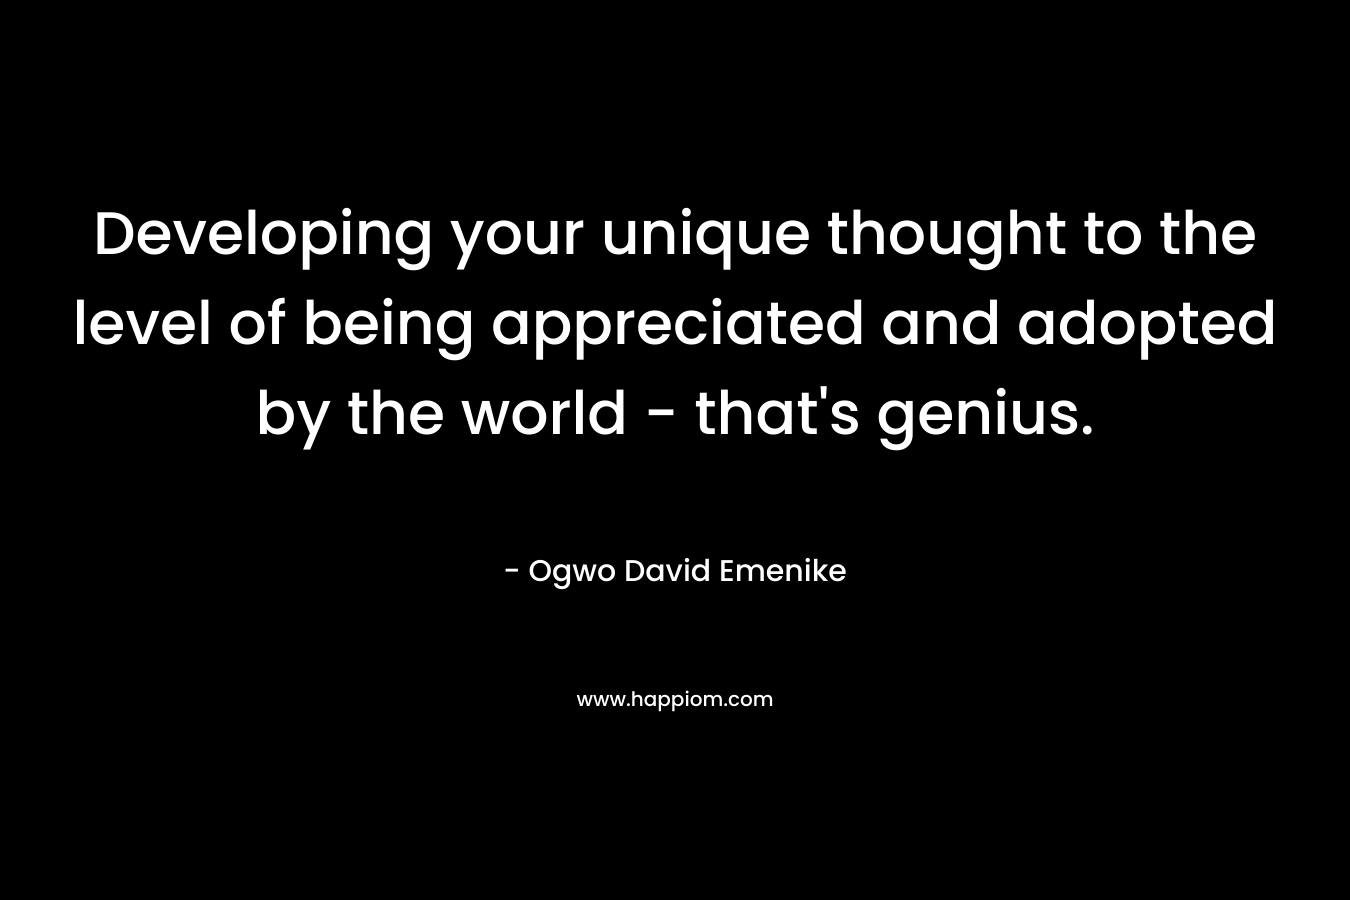 Developing your unique thought to the level of being appreciated and adopted by the world – that’s genius. – Ogwo David Emenike